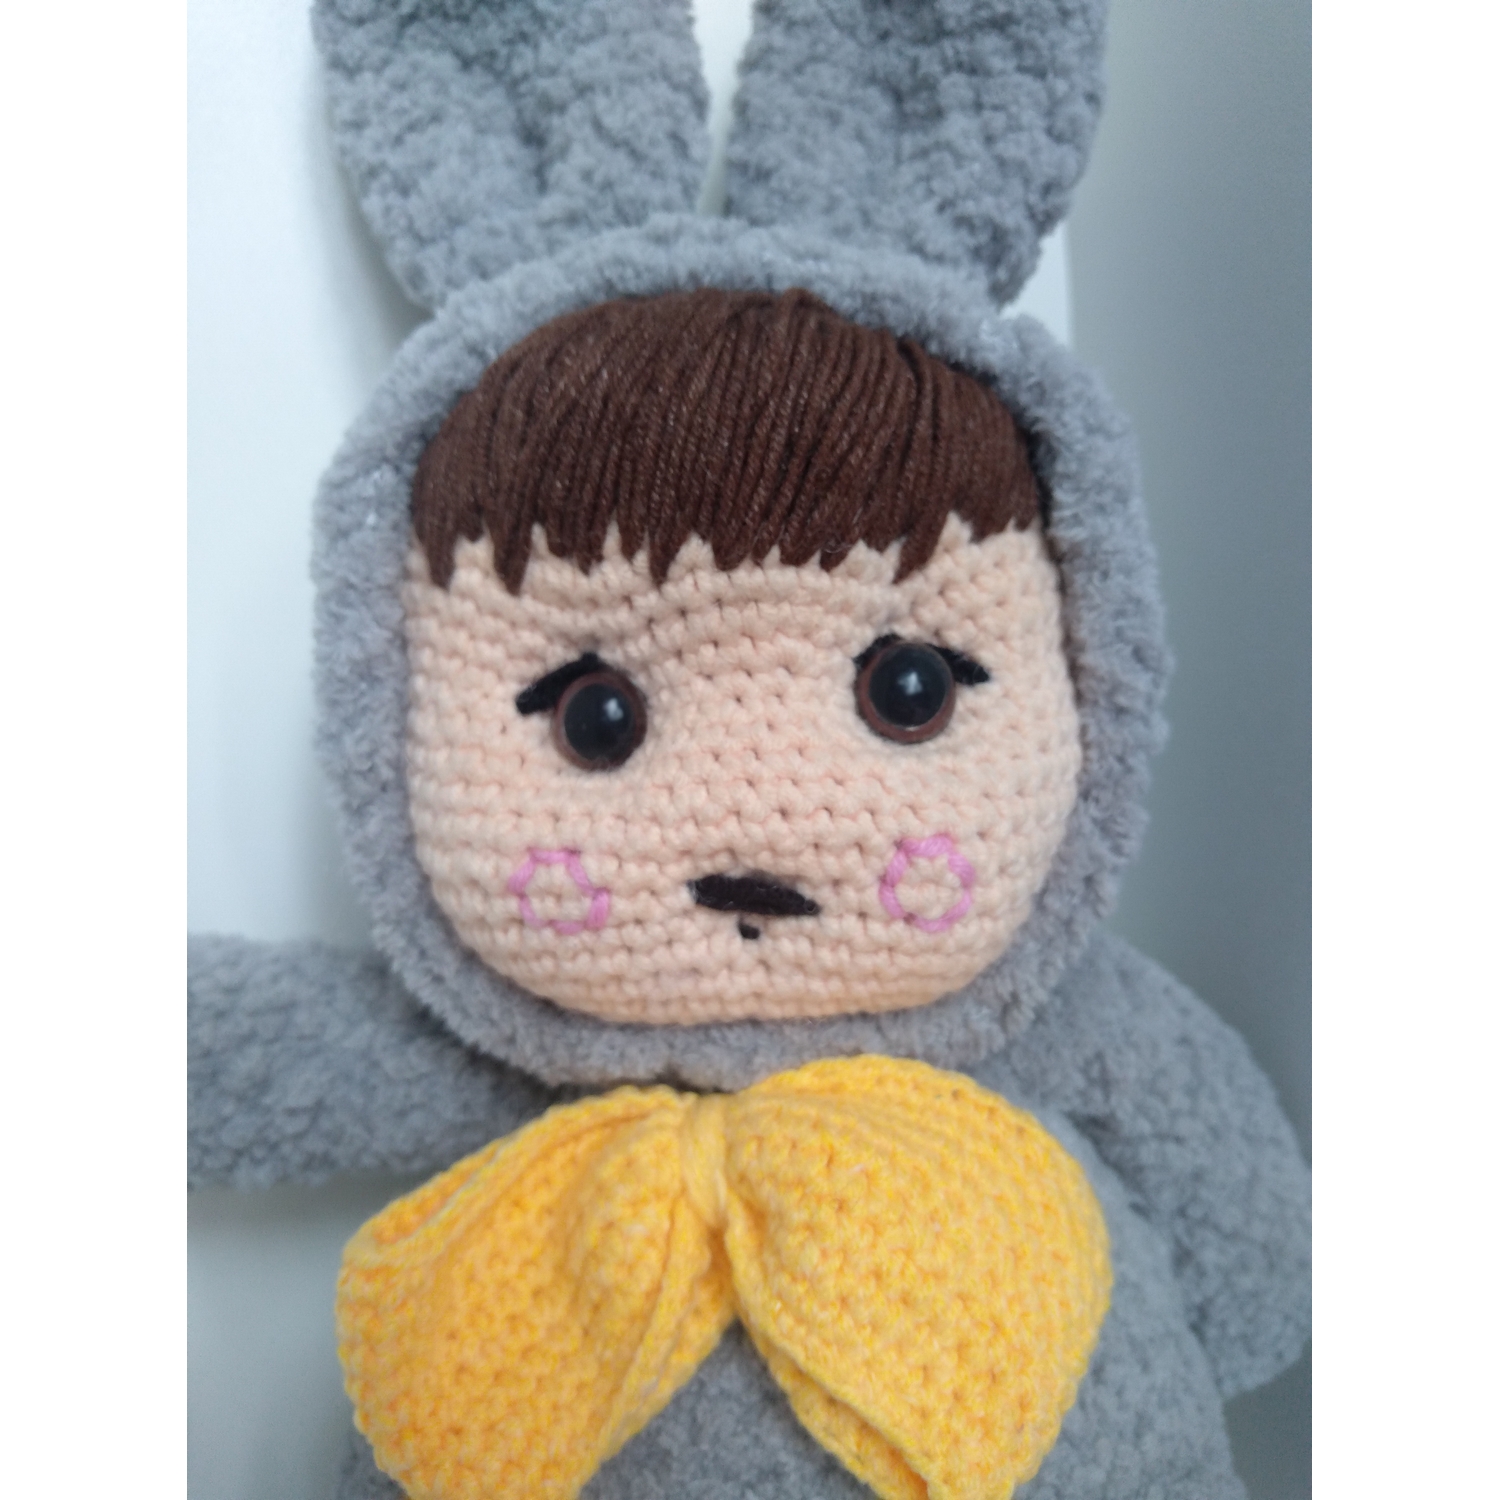 BTS Jungkook Bunny Cute and Funny BTS Plush Doll 1 of a kind